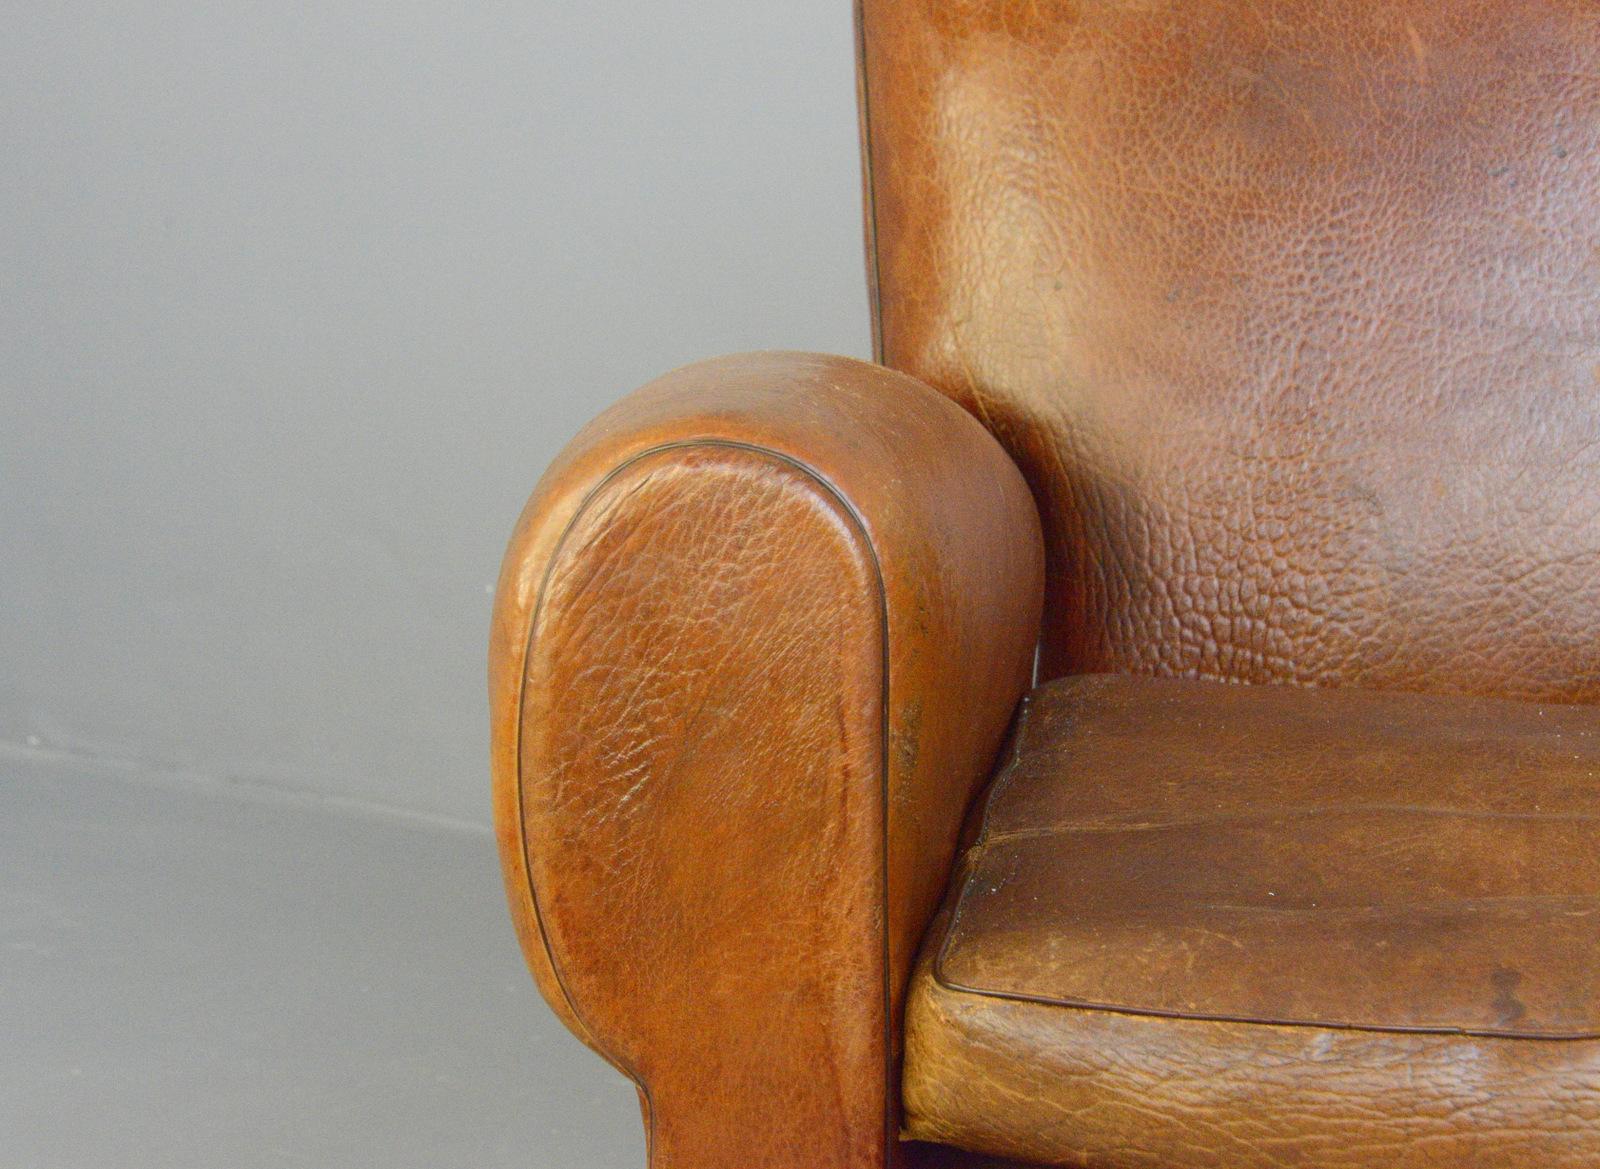 Leather moustache back armchair, circa 1930s

- Cognac textured leather
- Brass studs on the back
- Sprung seats, backrests and arms
- Moustache detail to the headrest
- French, 1930s
- Measures: 89cm wide x 86cm deep x 84cm tall
- 42cm seat